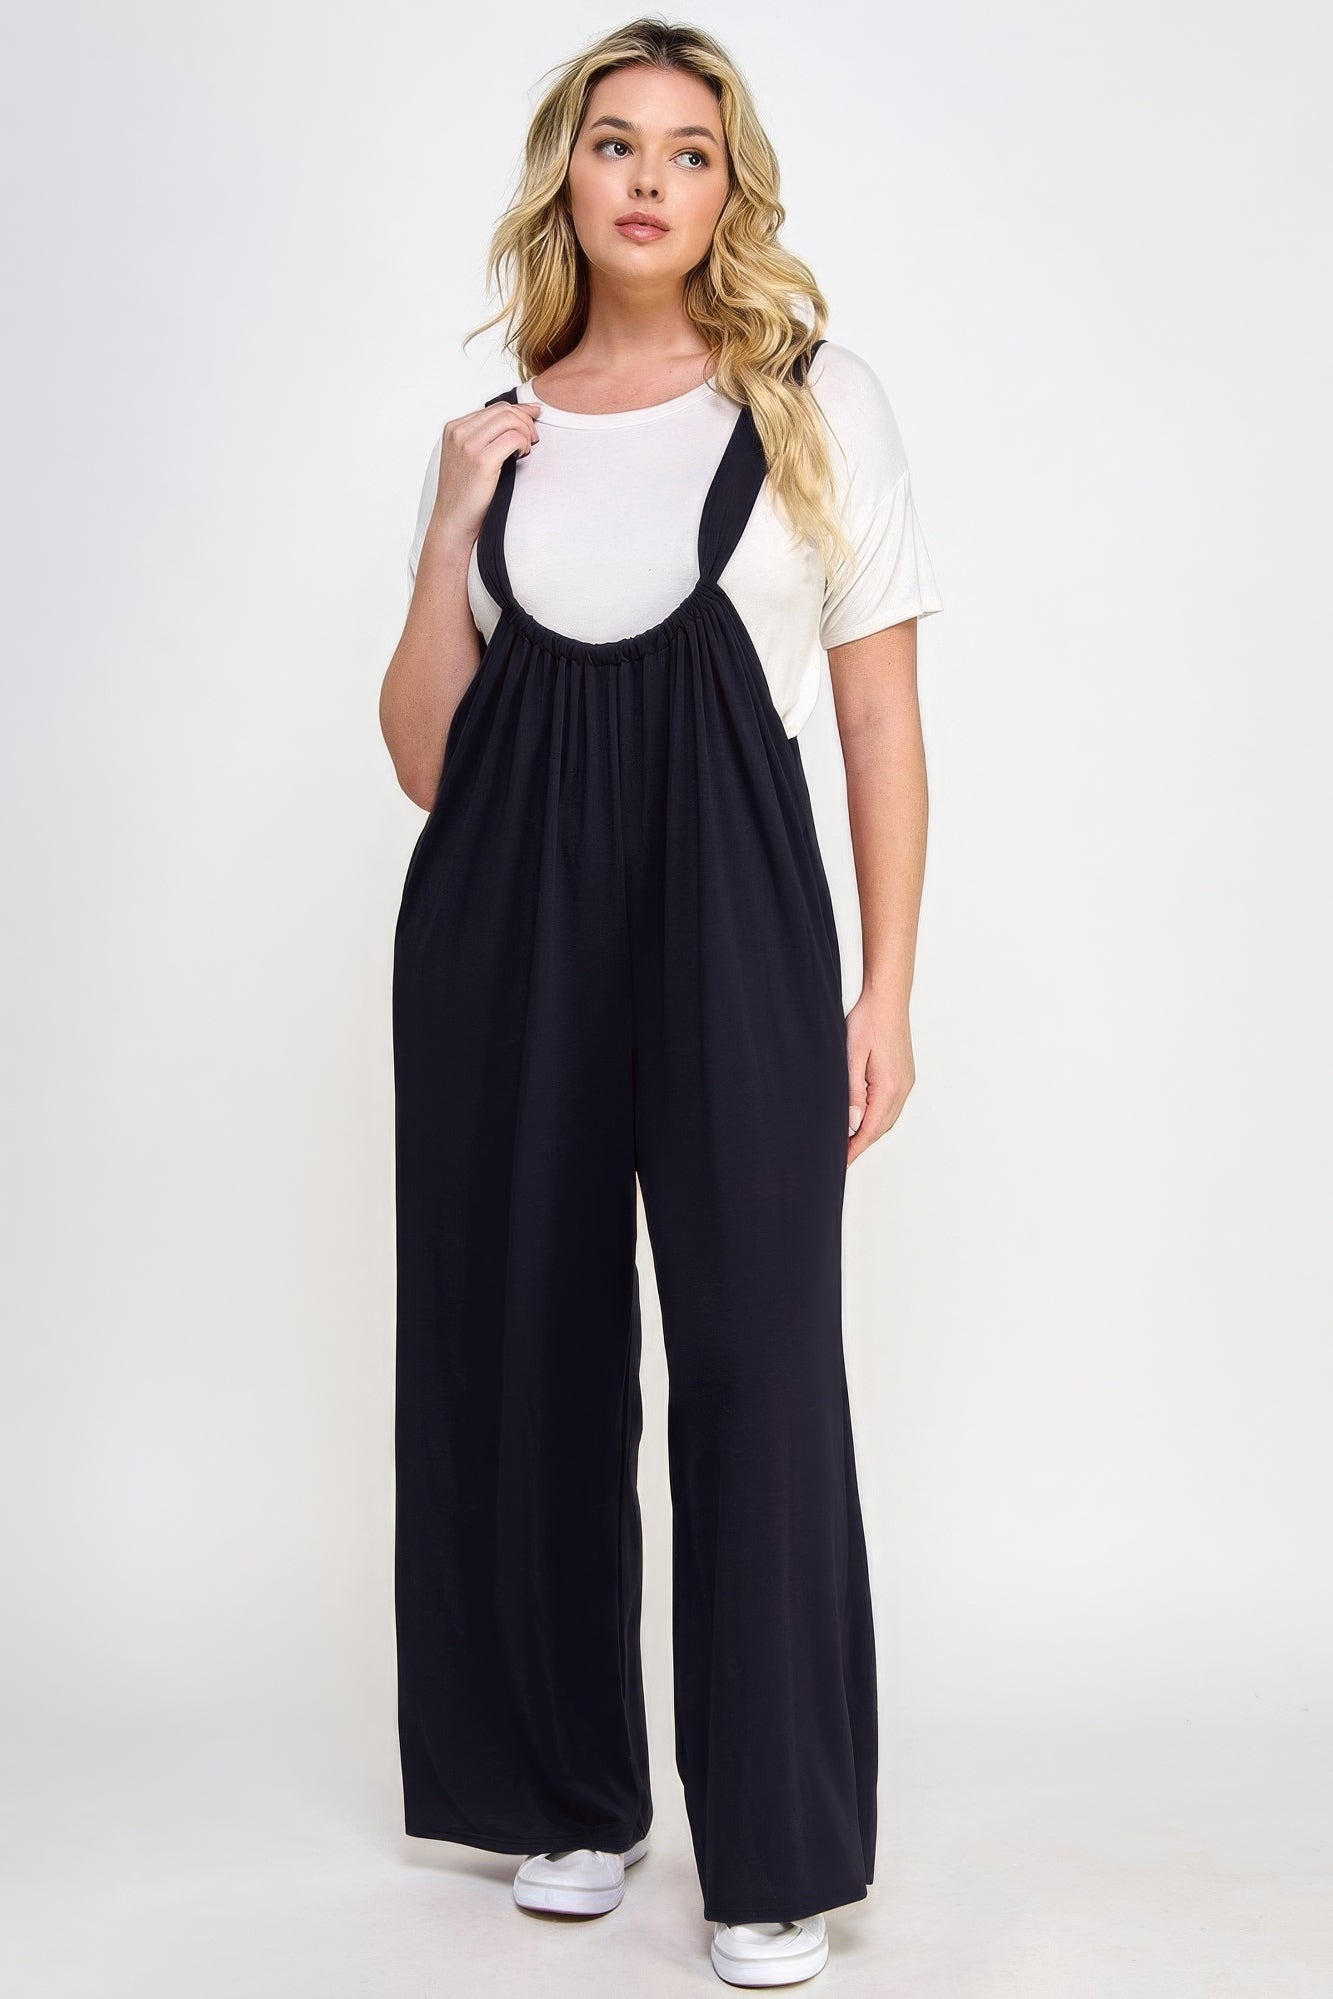 Black - Voluptuous (+) French Terry Wide Leg Women's Plus Size Overalls Jumpsuit - womens overalls at TFC&H Co.